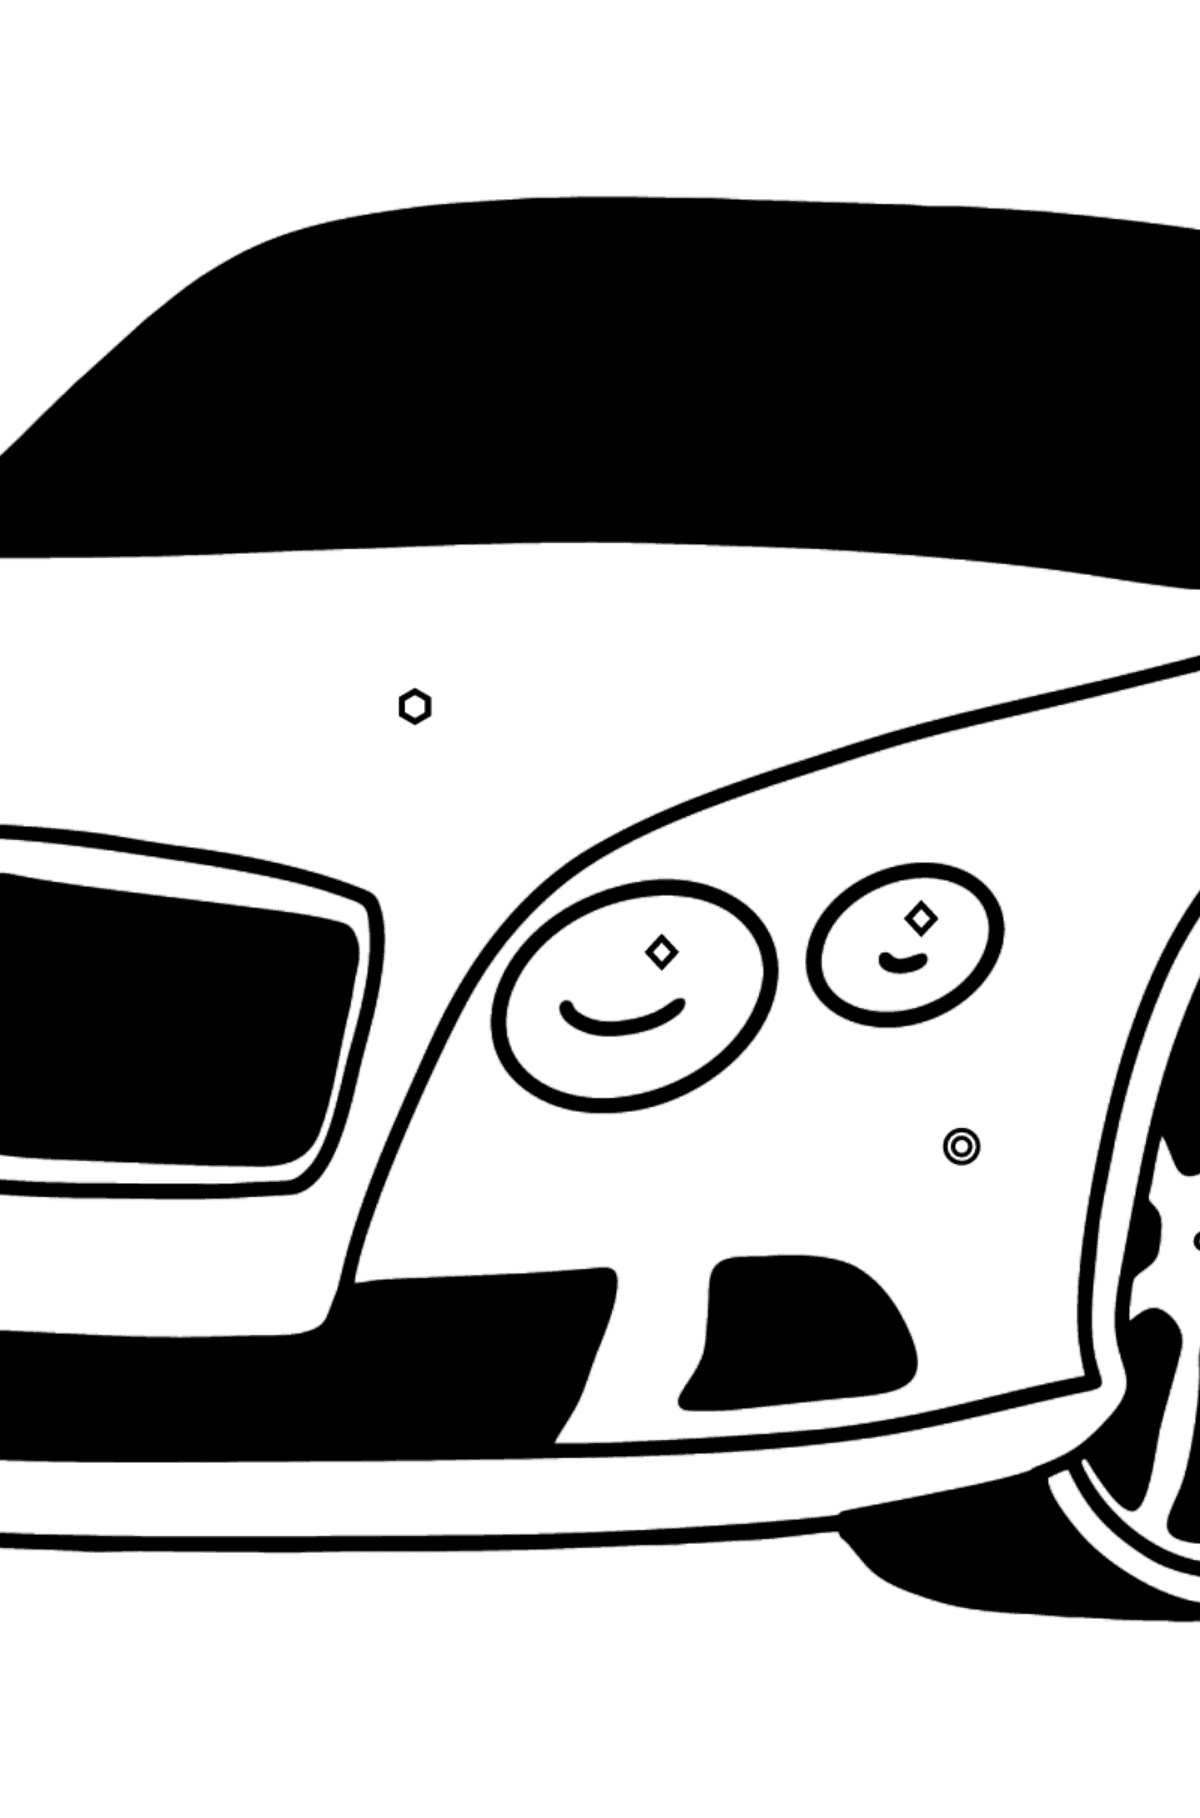 Bentley Continental GT Car coloring page - Coloring by Geometric Shapes for Kids